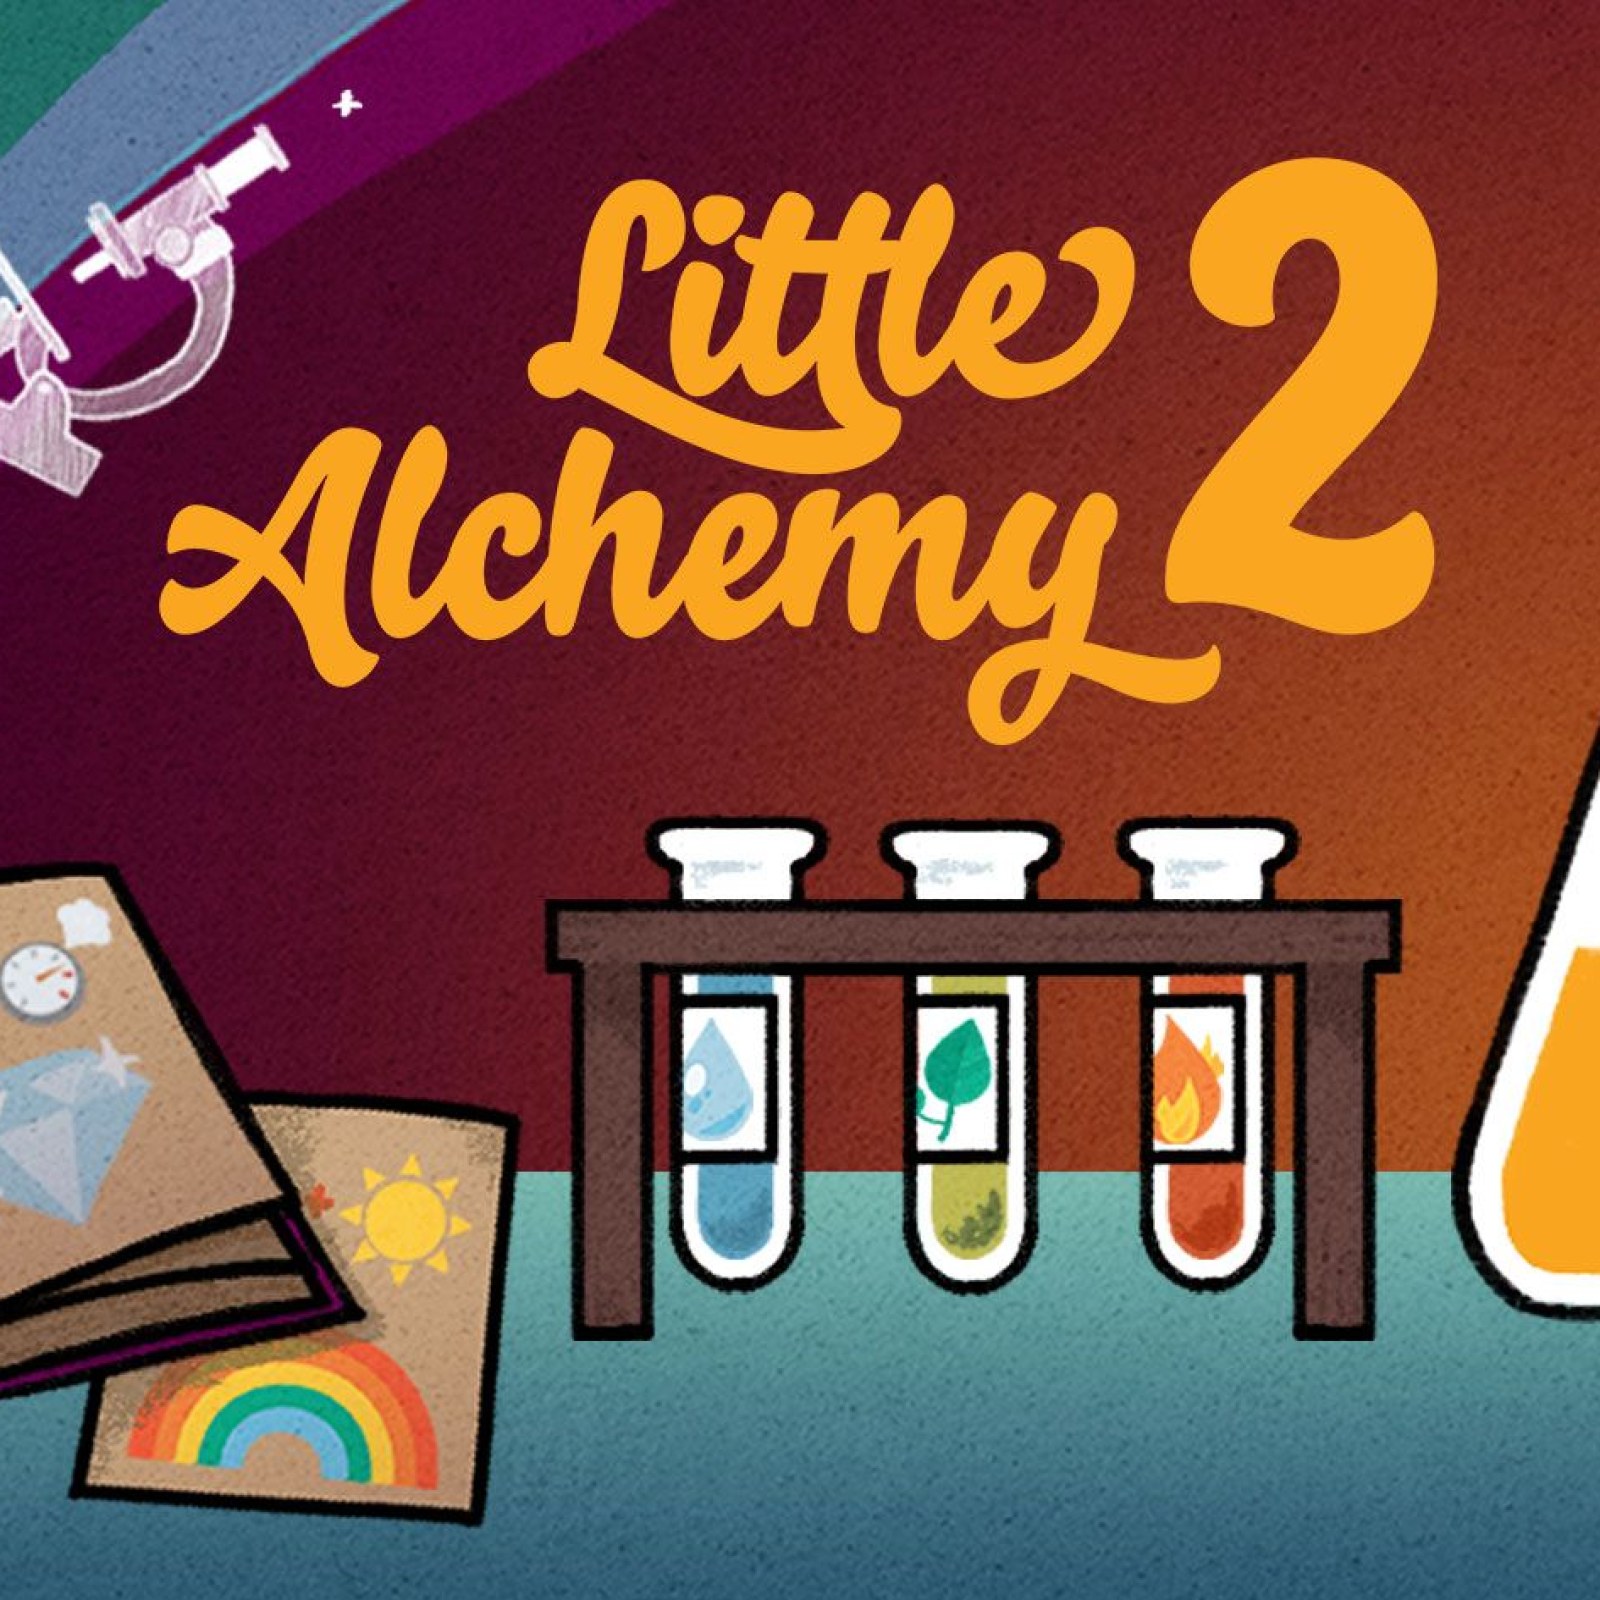 How to make yggdrasil - Little Alchemy 2 Official Hints and Cheats